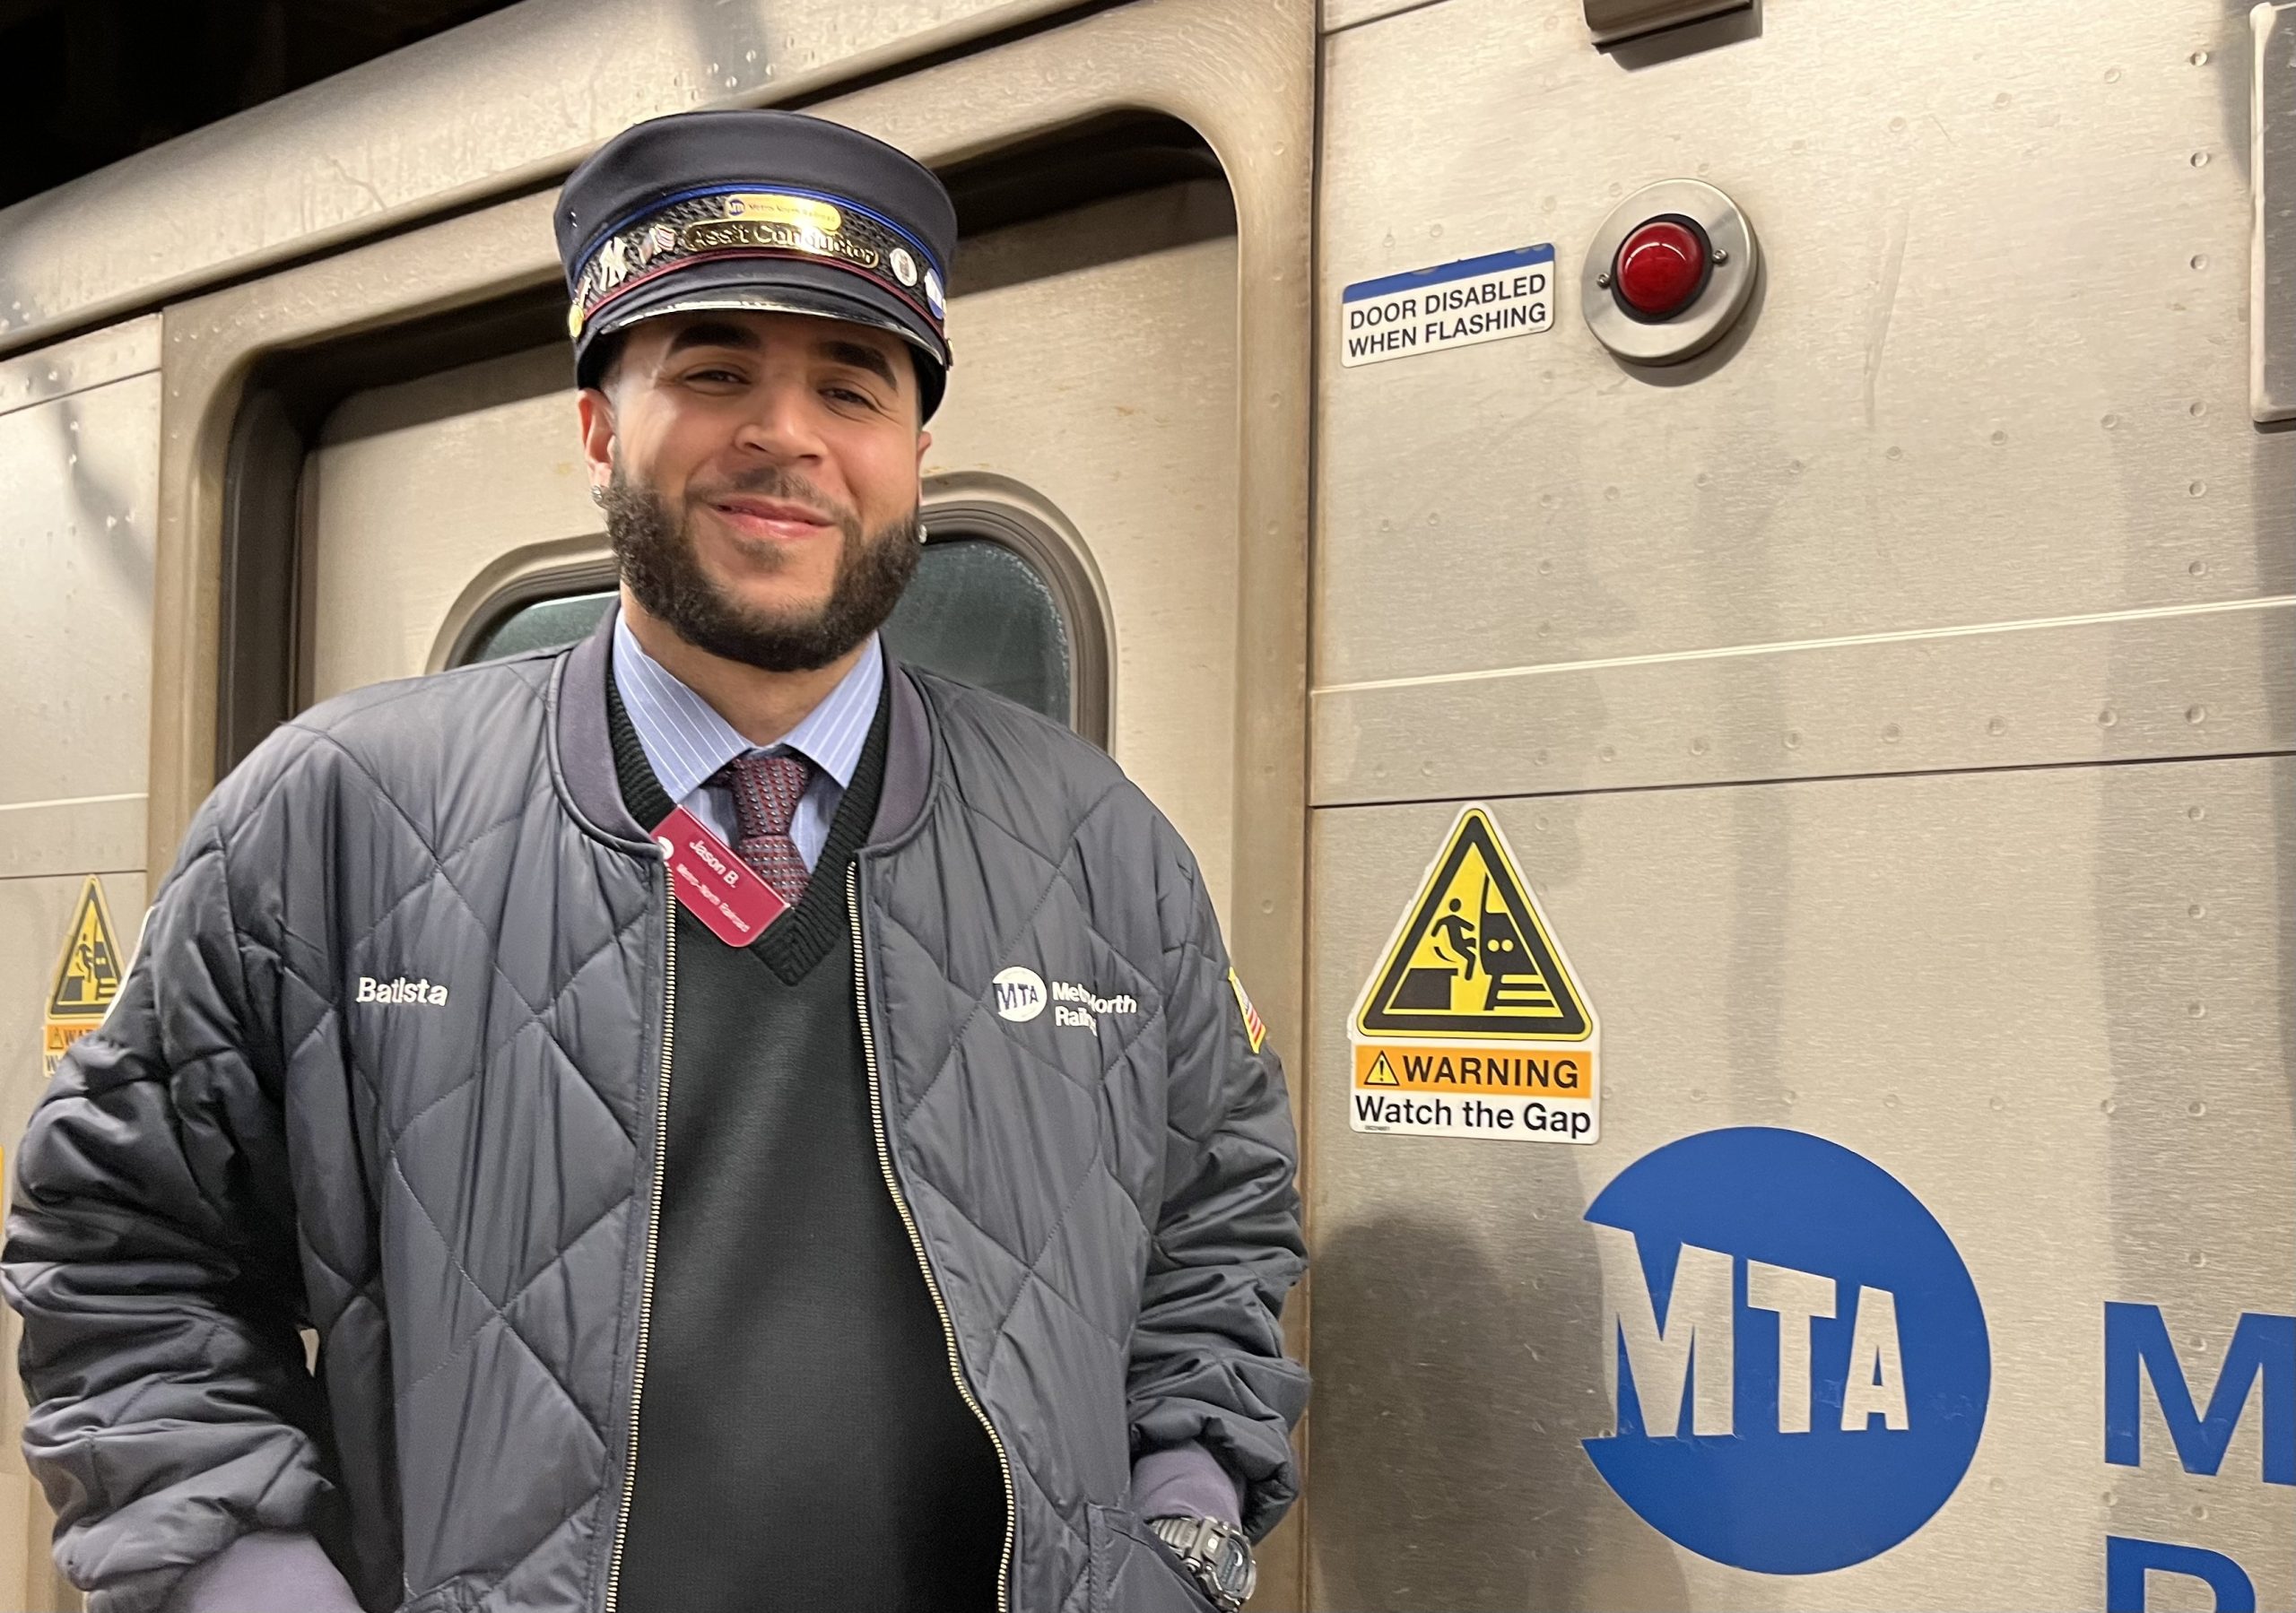 A man in a conductor's uniform stands in front of a Metro North train.